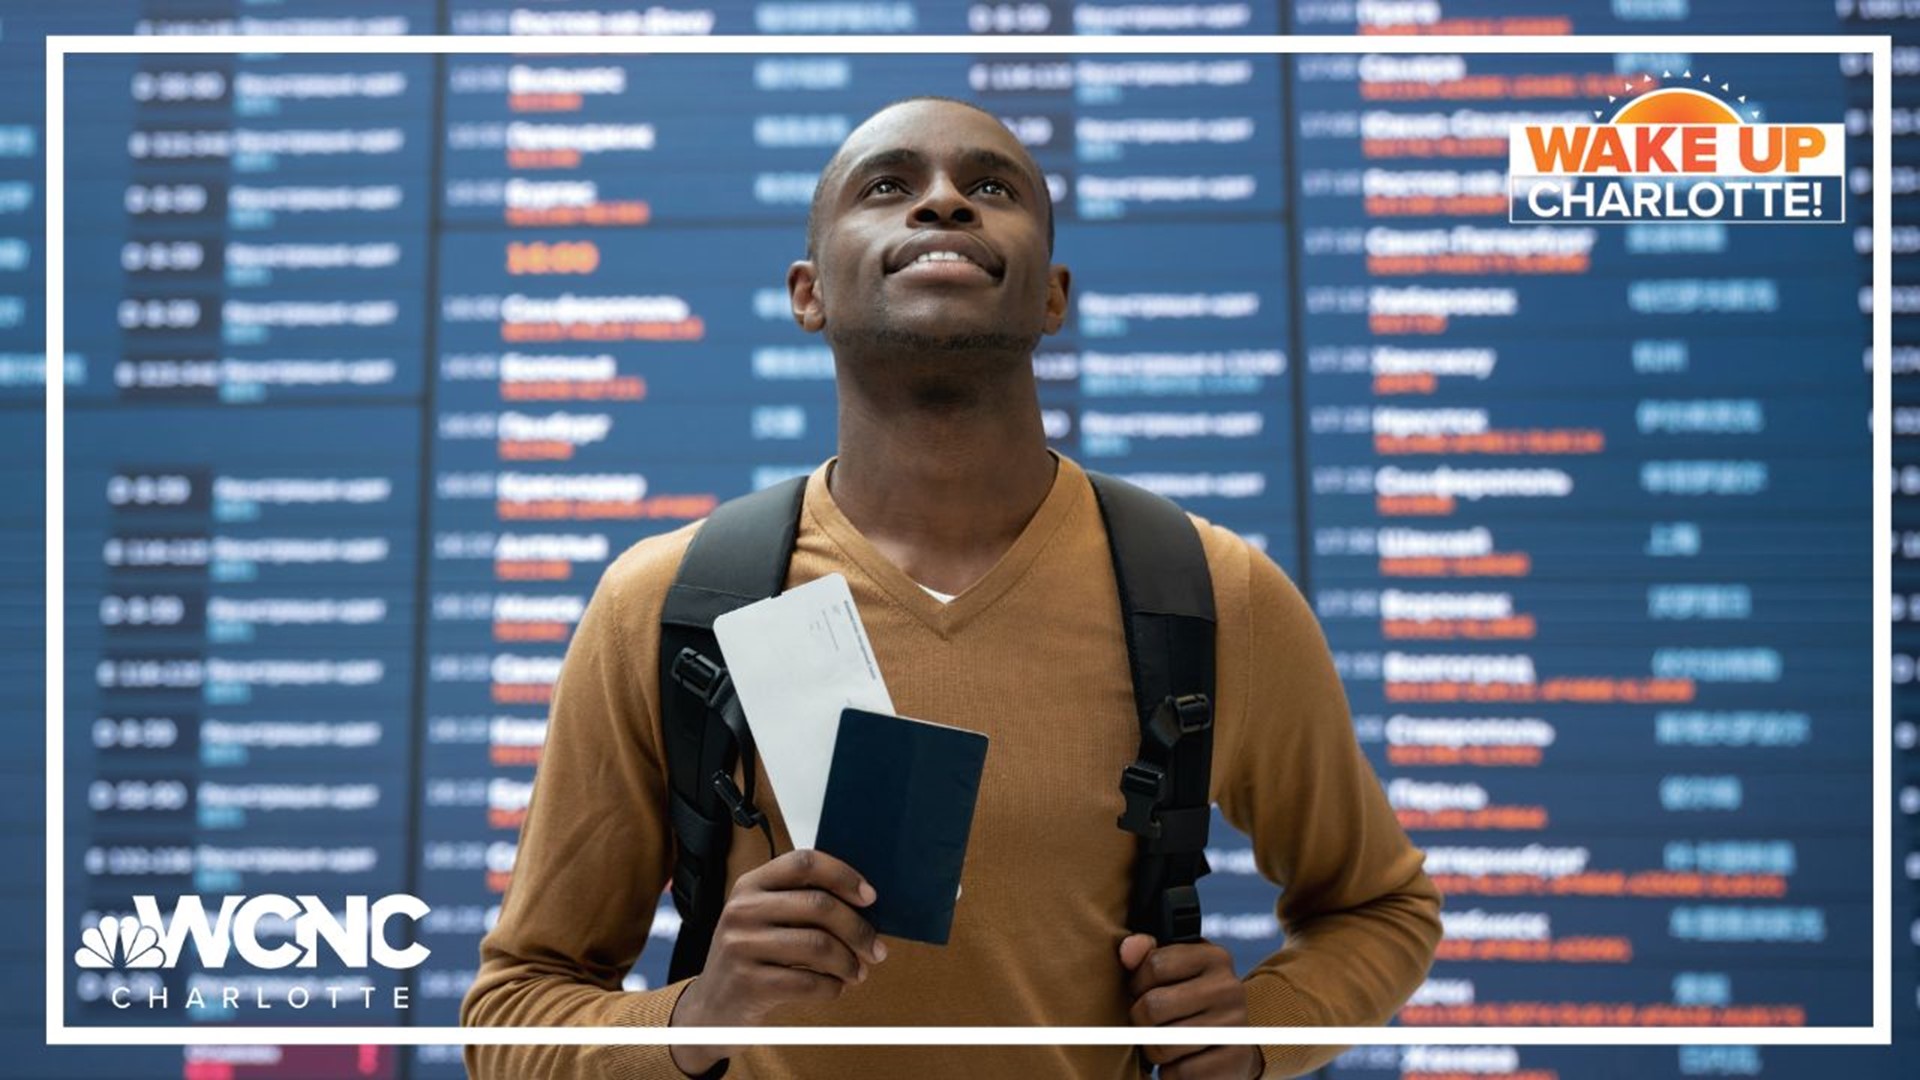 We're creeping closer to the holidays and for millions of Americans, that means hopping on a plane to visit family. Here are some tips to help your holiday travel.